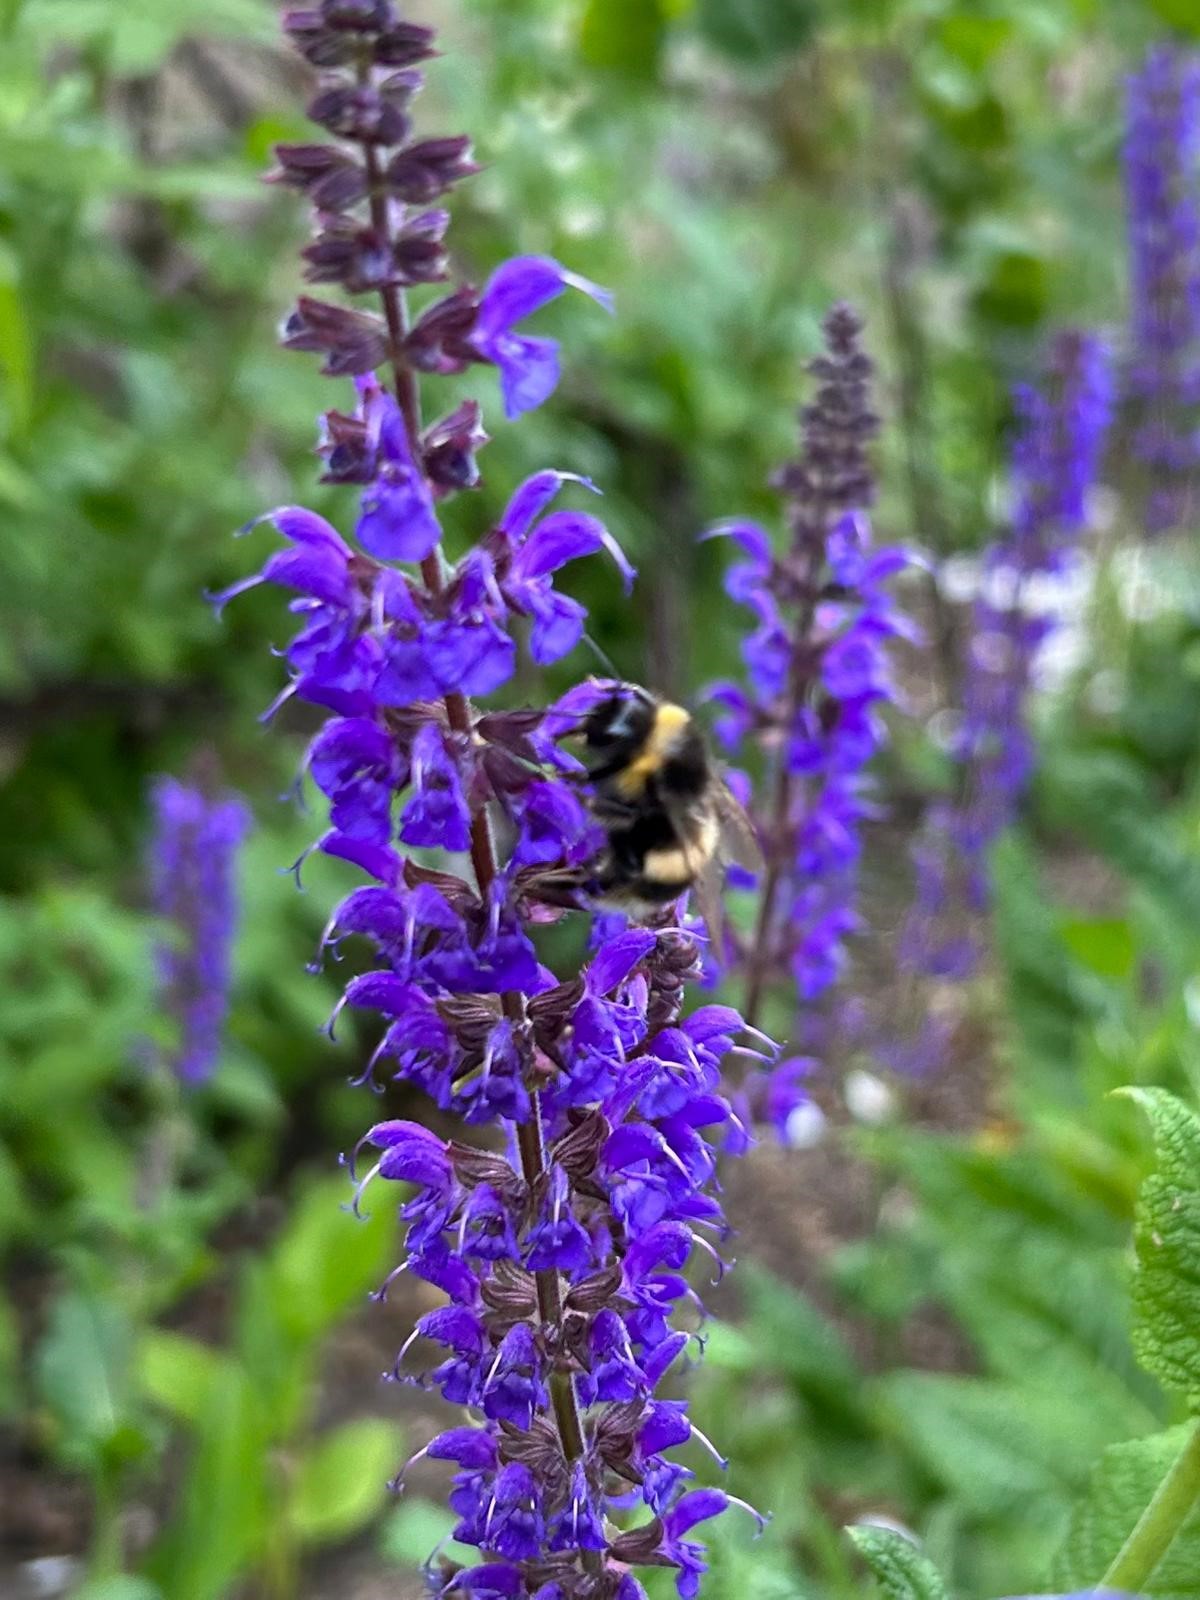 Close up of a bumble bee on one of the salvia x sylvestris flowers in the Trinity president's garden.